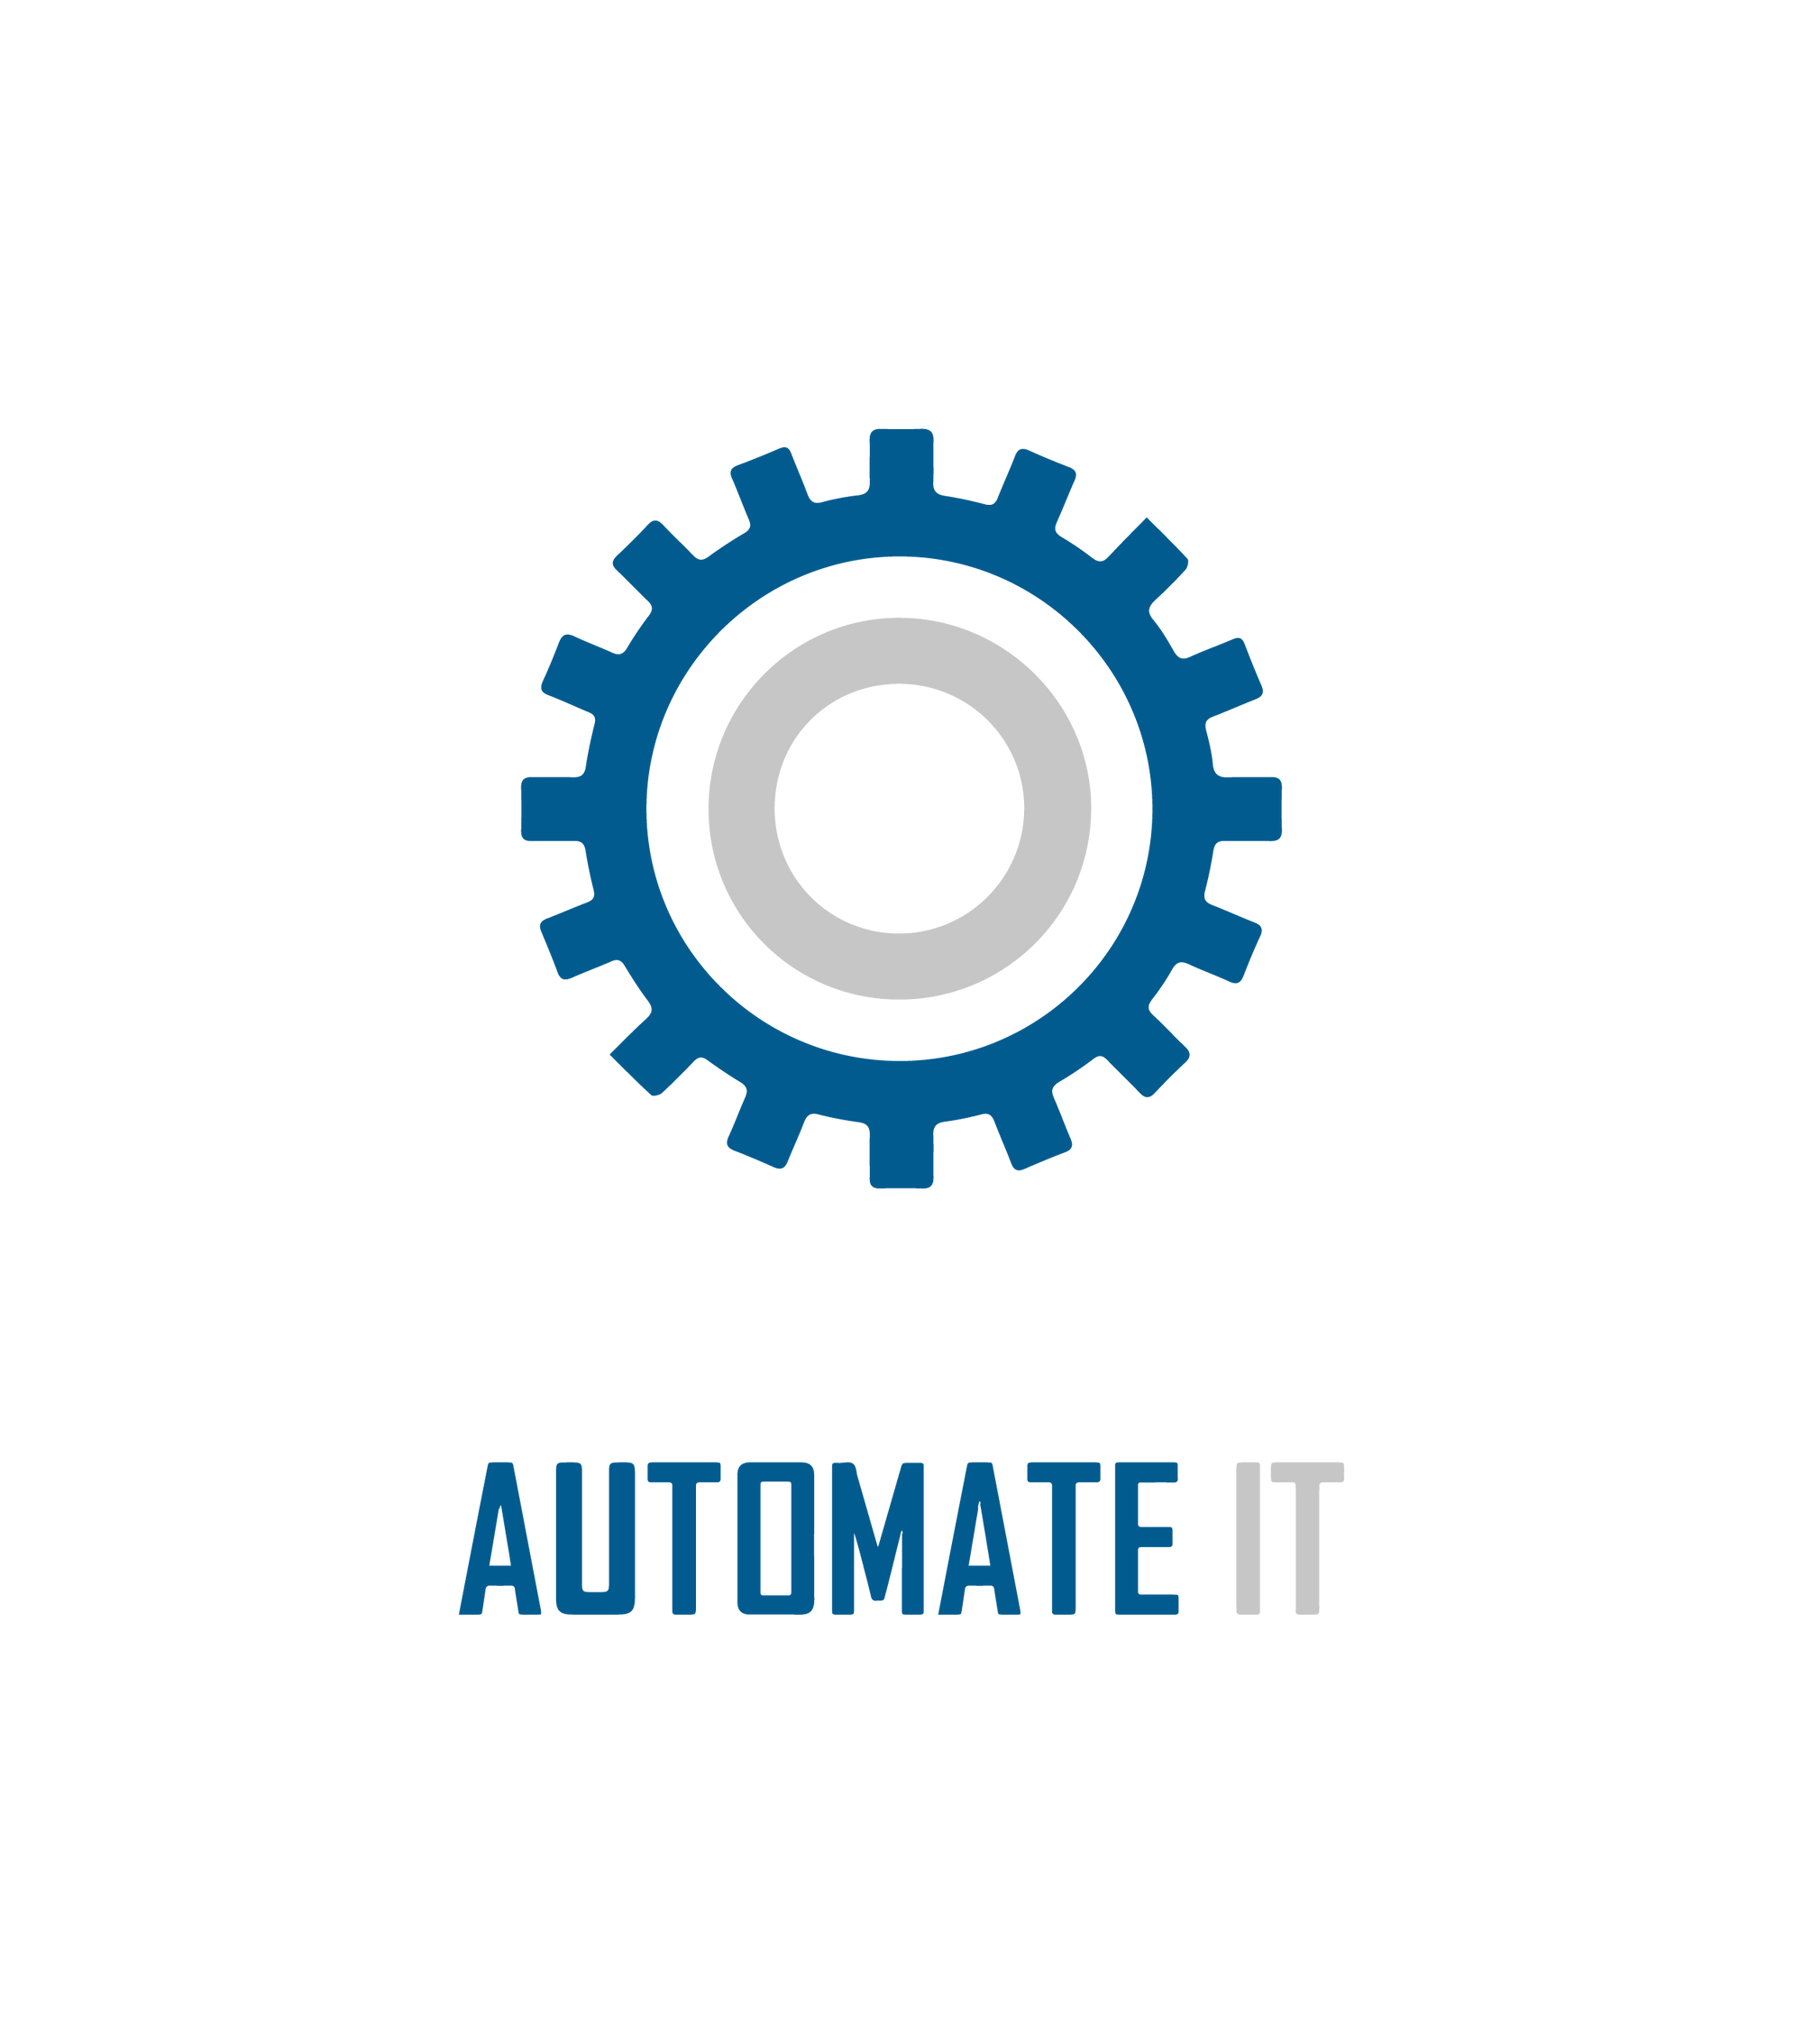 Cargo Packaging logo for Automate It - Cargo Packaging helps businesses to automate their packaging and shipping process